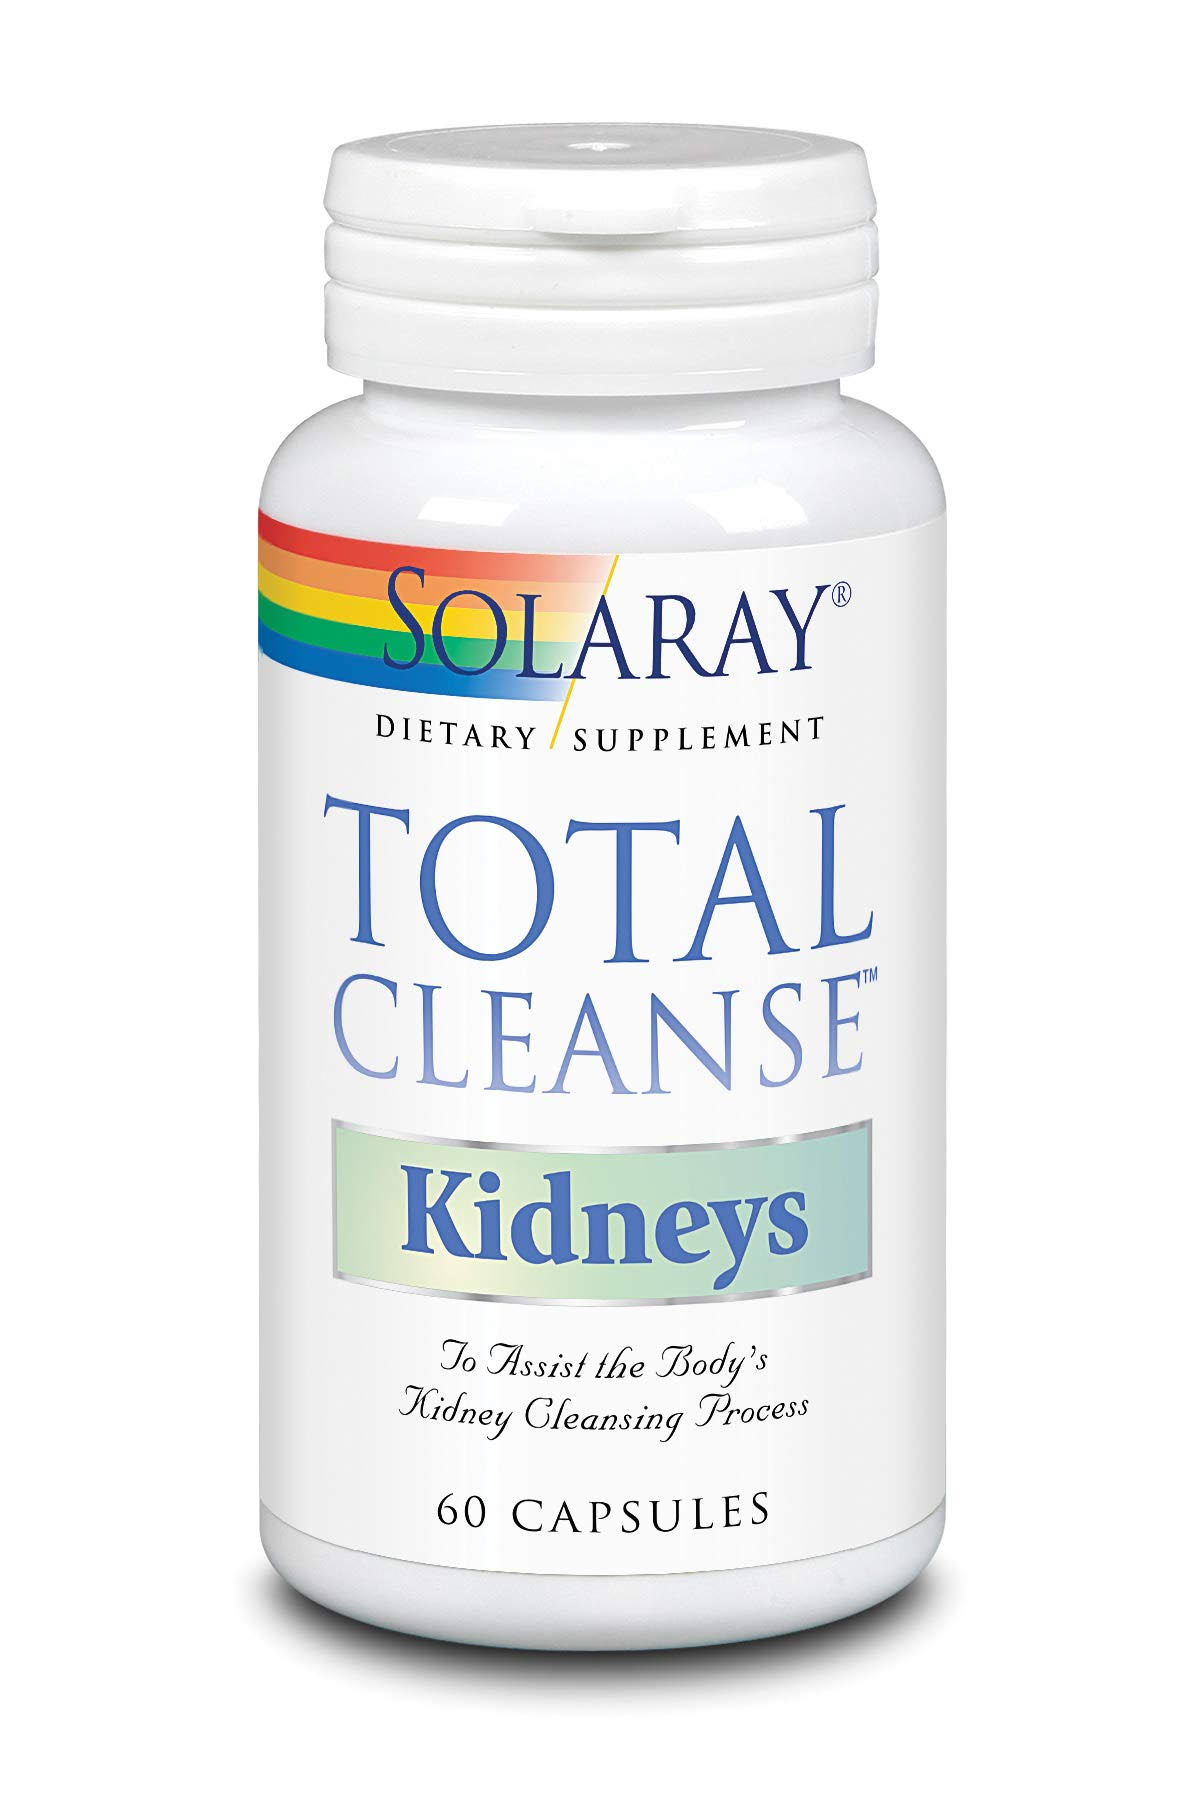 Solaray Total Cleanse Kidneys - 60 Capsules